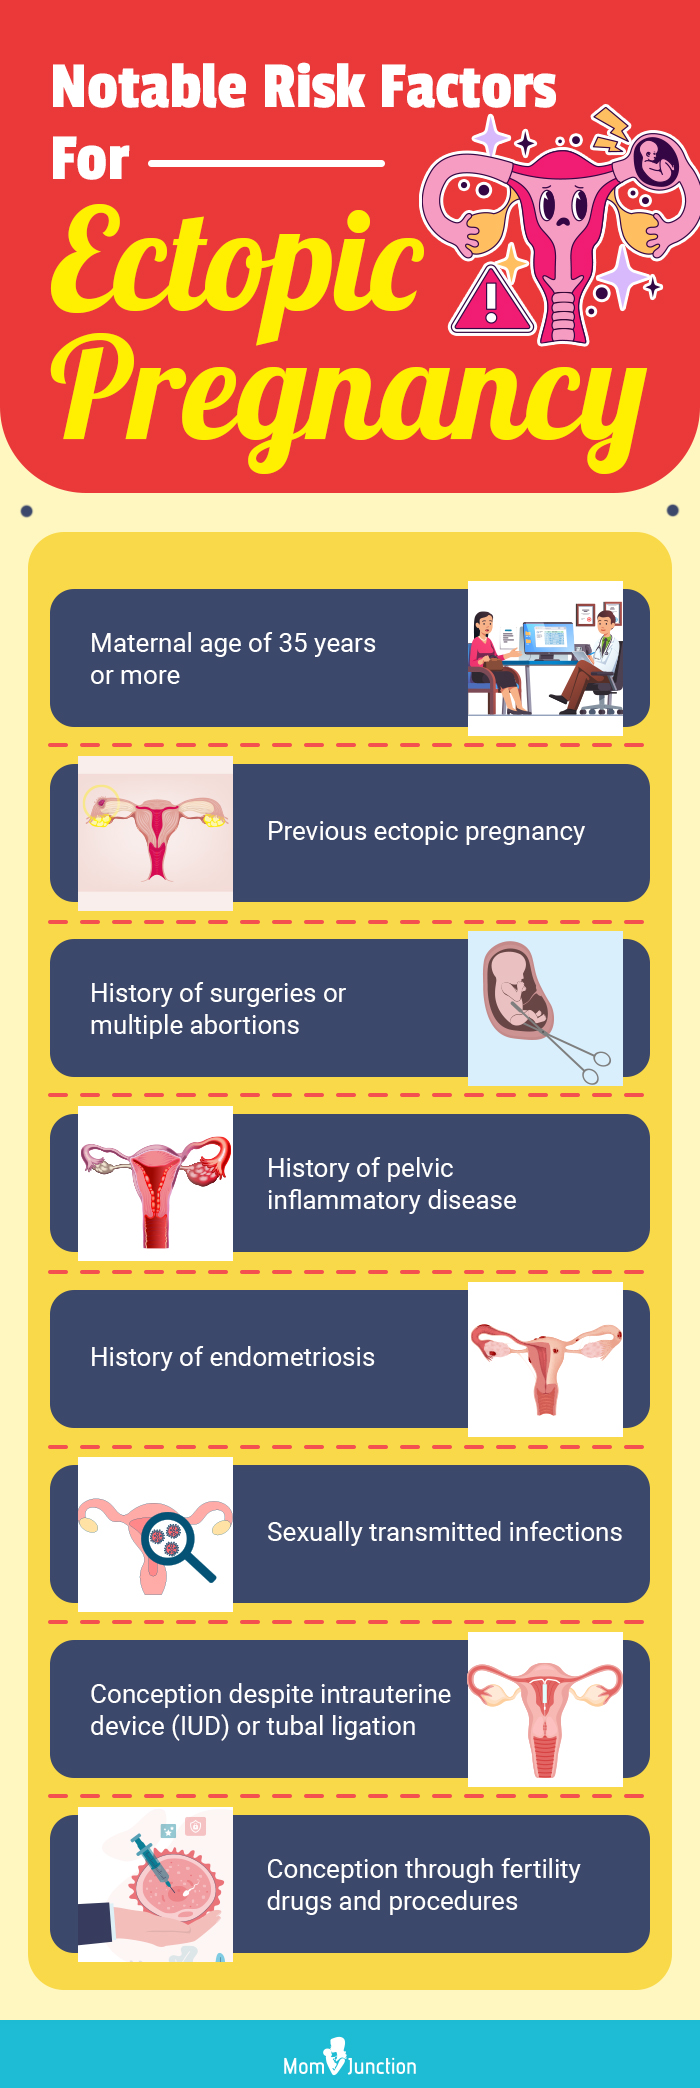 notable risk factors for ectopic pregnancy (infographic)